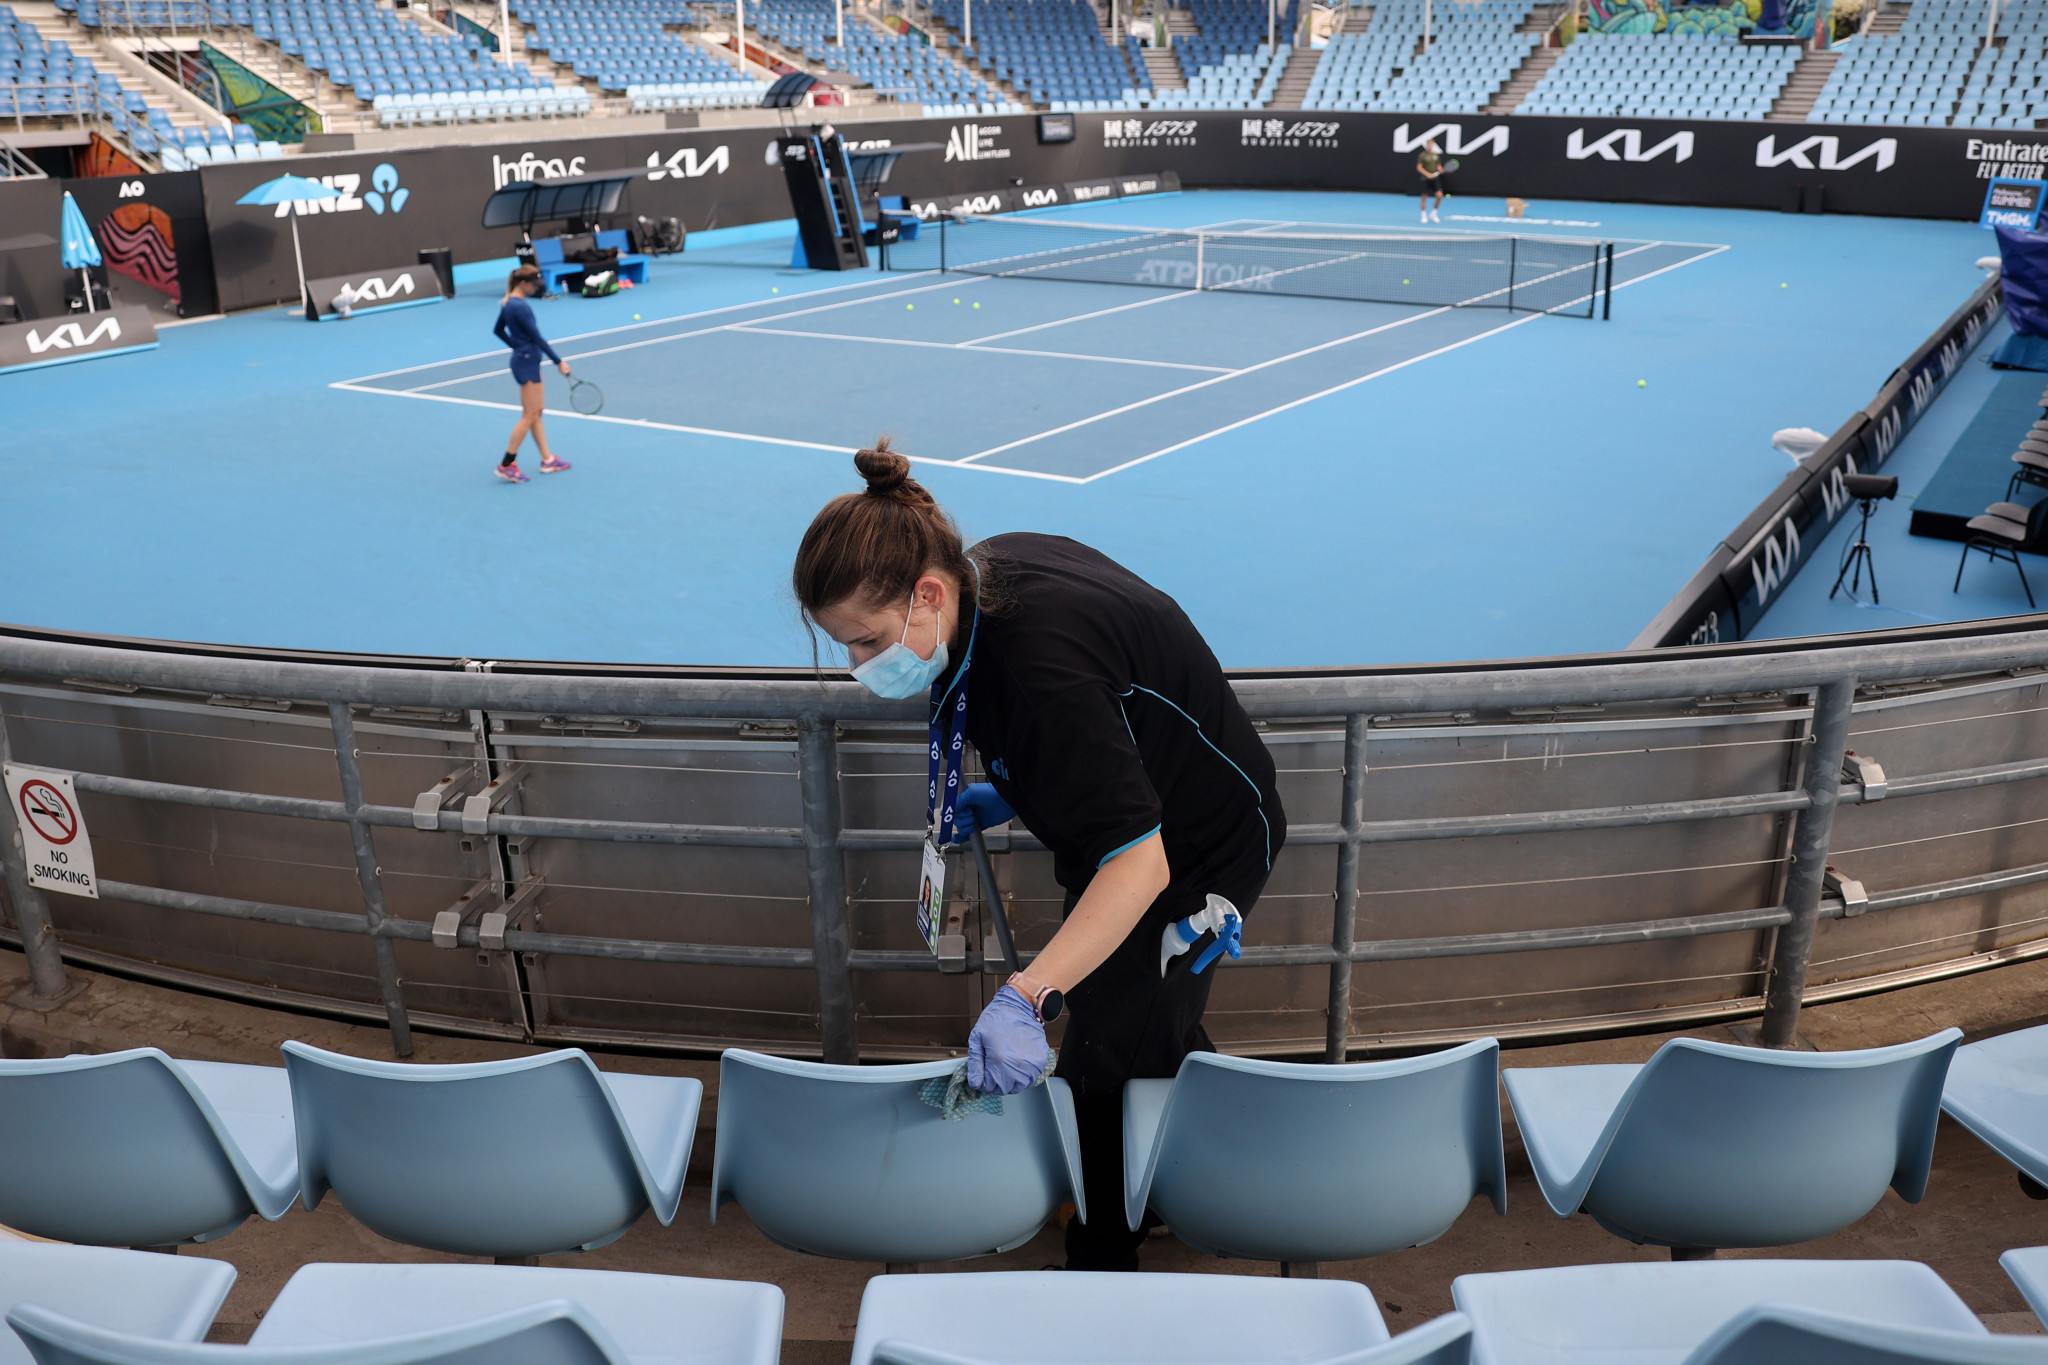 This year's Australian Open in Melbourne was affected by measures to fight COVID-19, including crowds being restricted ©Getty Images